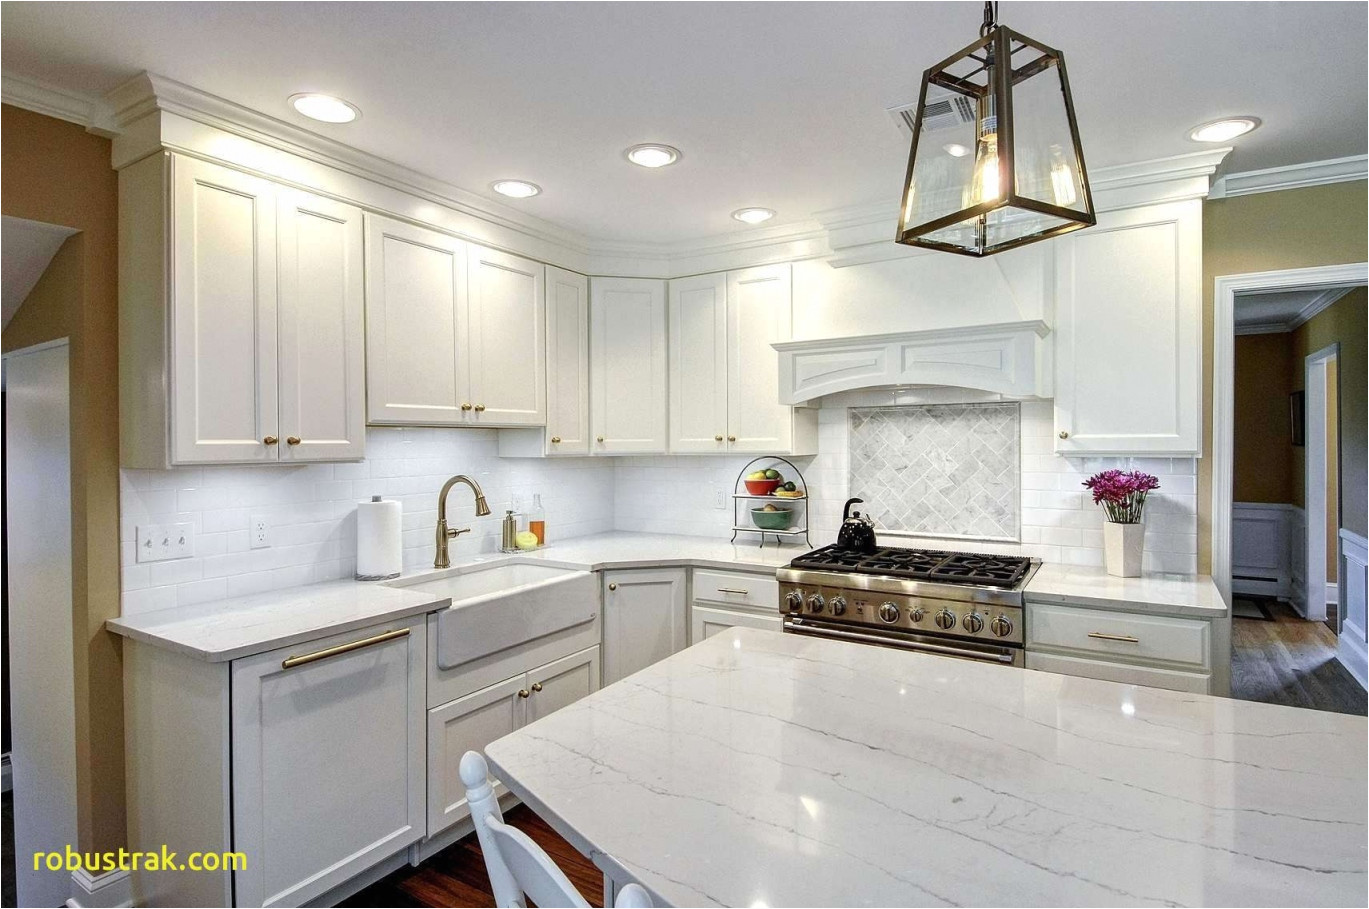 image of attractive recessed lighting for kitchen ceiling